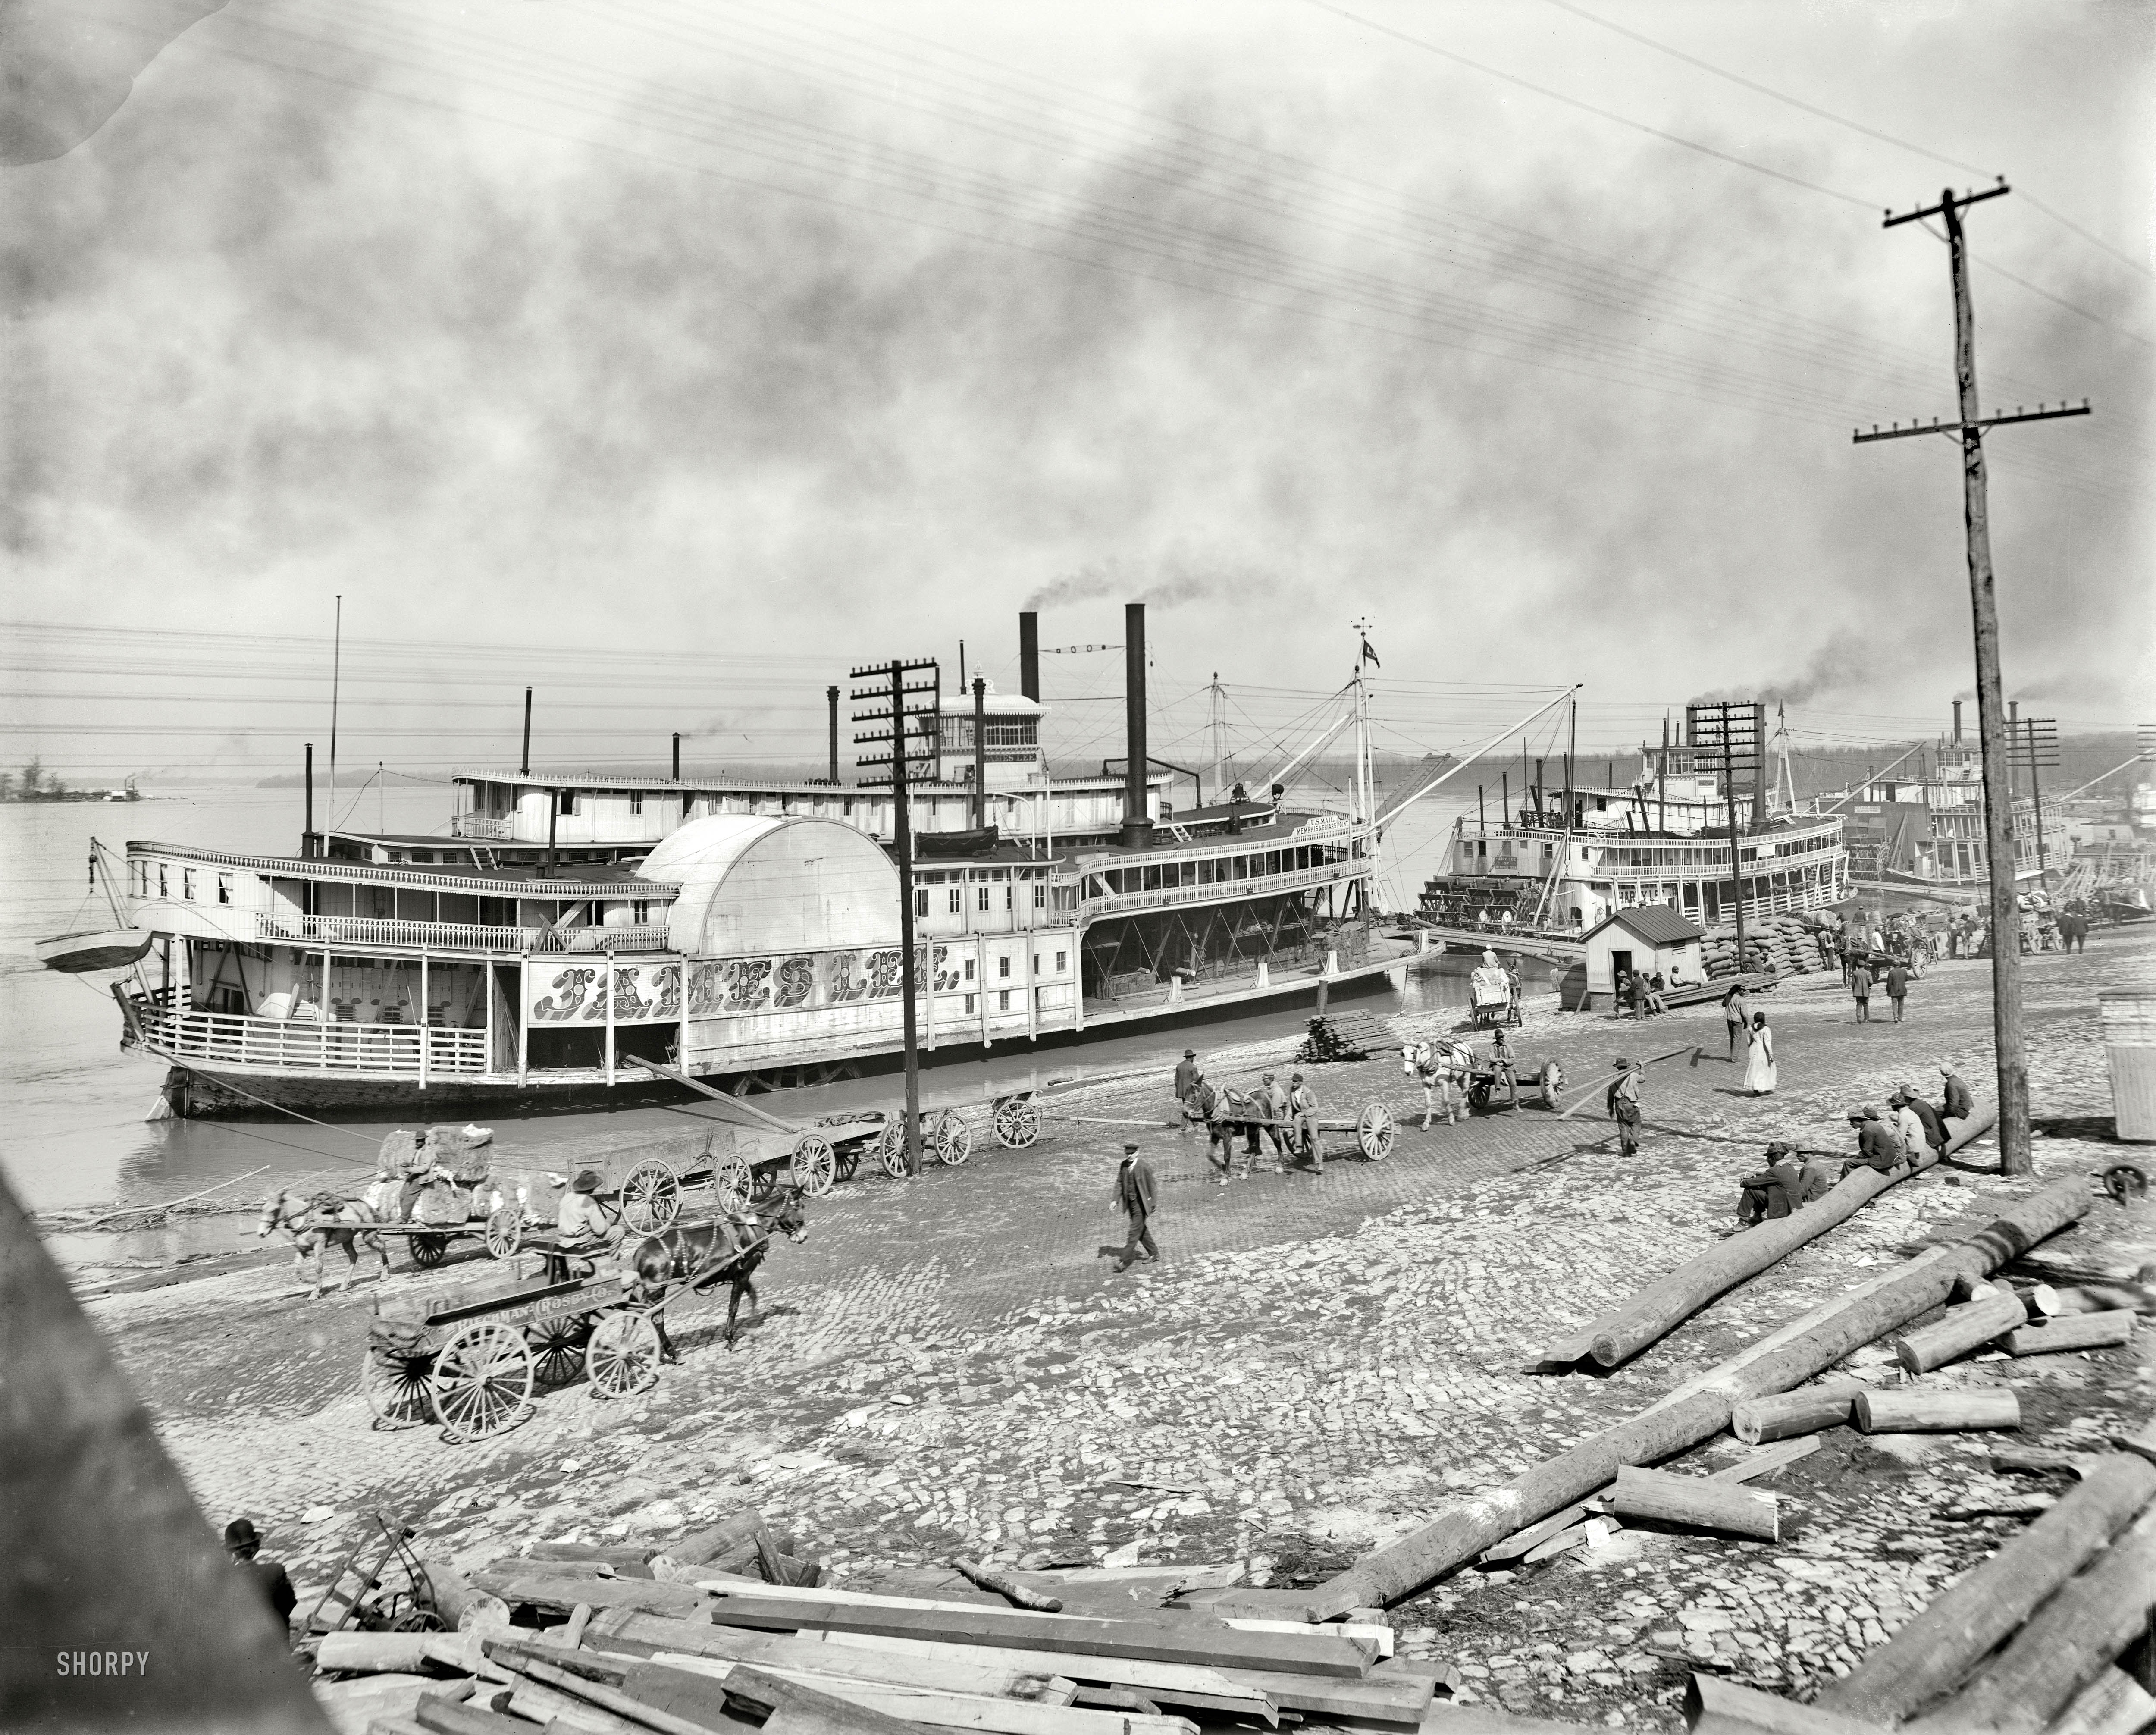 The Mississippi River circa 1900. "The levee at Memphis. Sidewheeler James Lee." In addition to the sternwheelers Harry Lee and City of St. Joseph. 8x10 inch dry plate glass negative, Detroit Publishing Company. View full size.